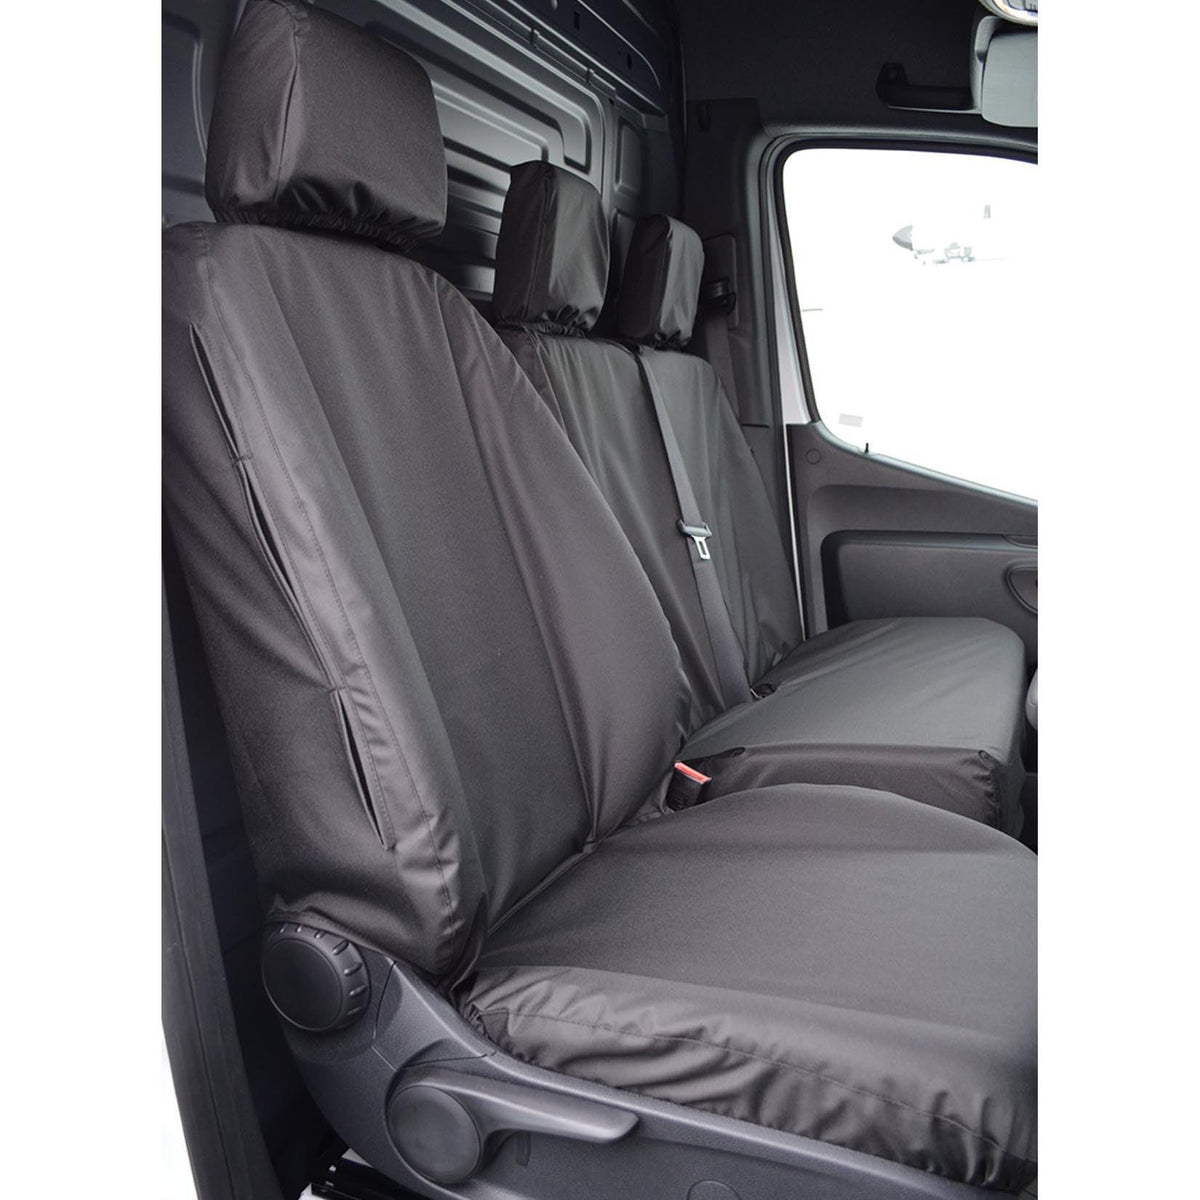 MERCEDES SPRINTER 2018 ON DRIVER AND FRONT DOUBLE PASSENGER SEAT COVERS - BLACK - Storm Xccessories2